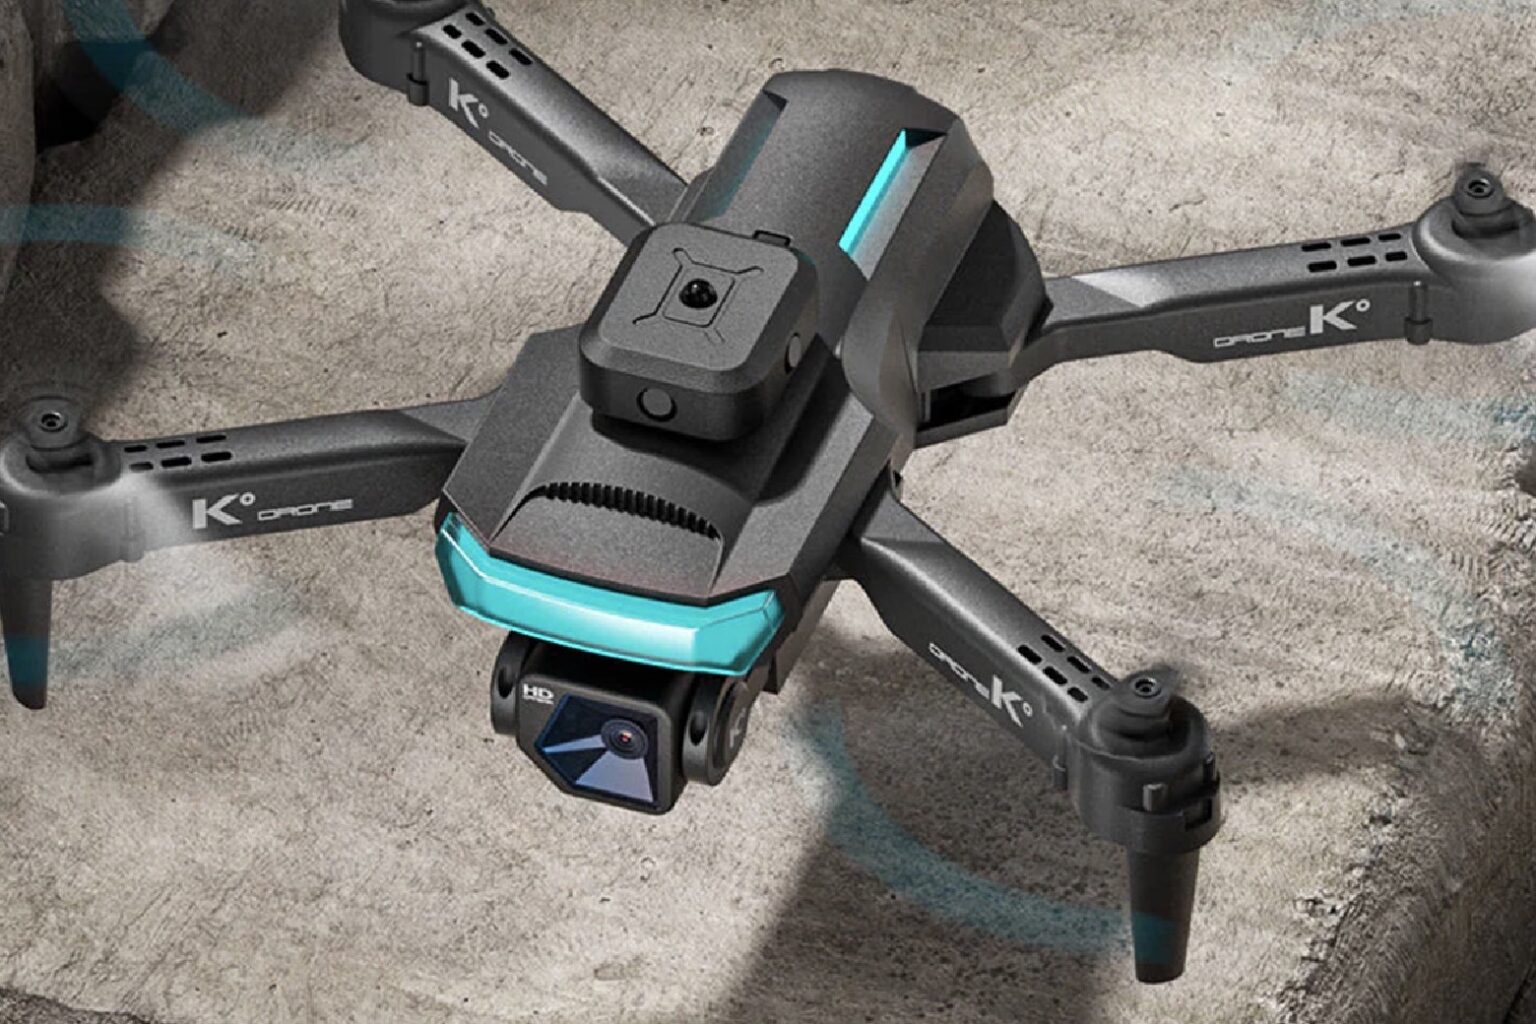 If you buy by today, you can get two 4K drones for under $160.